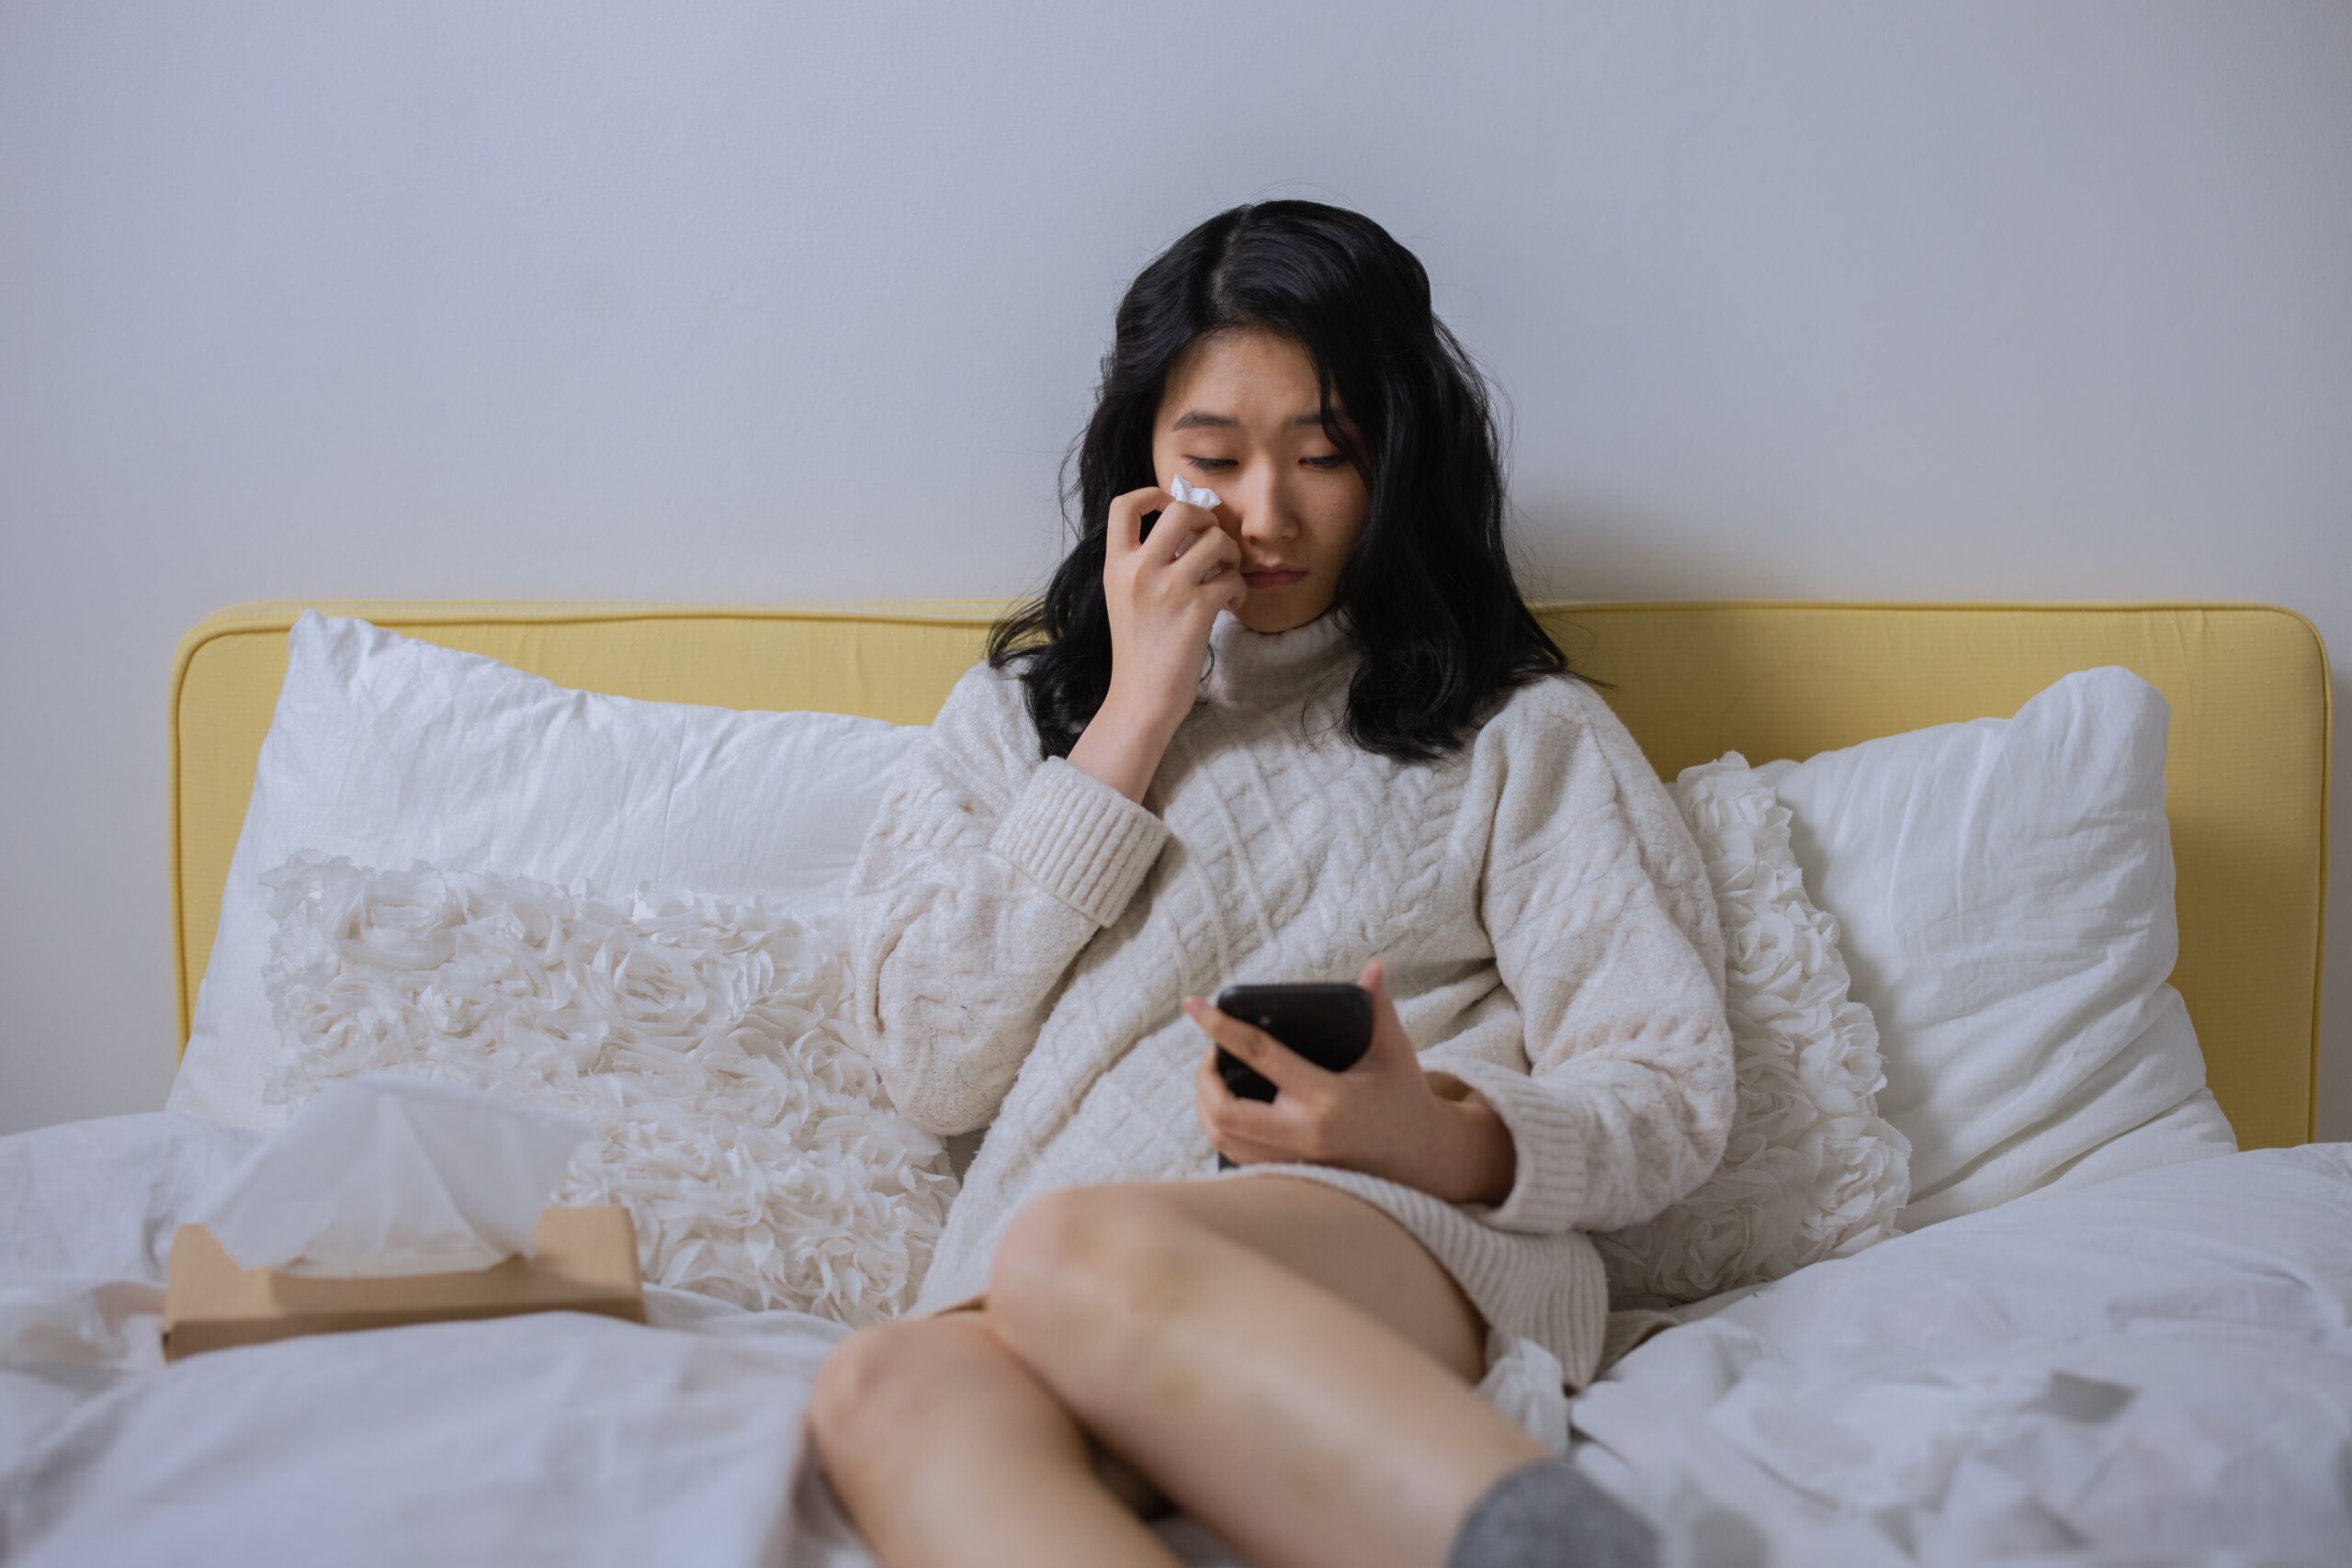 Woman sat on her bed looking at her phone with a tissue as she cries due to the negative effects social media has had on triggering her body image